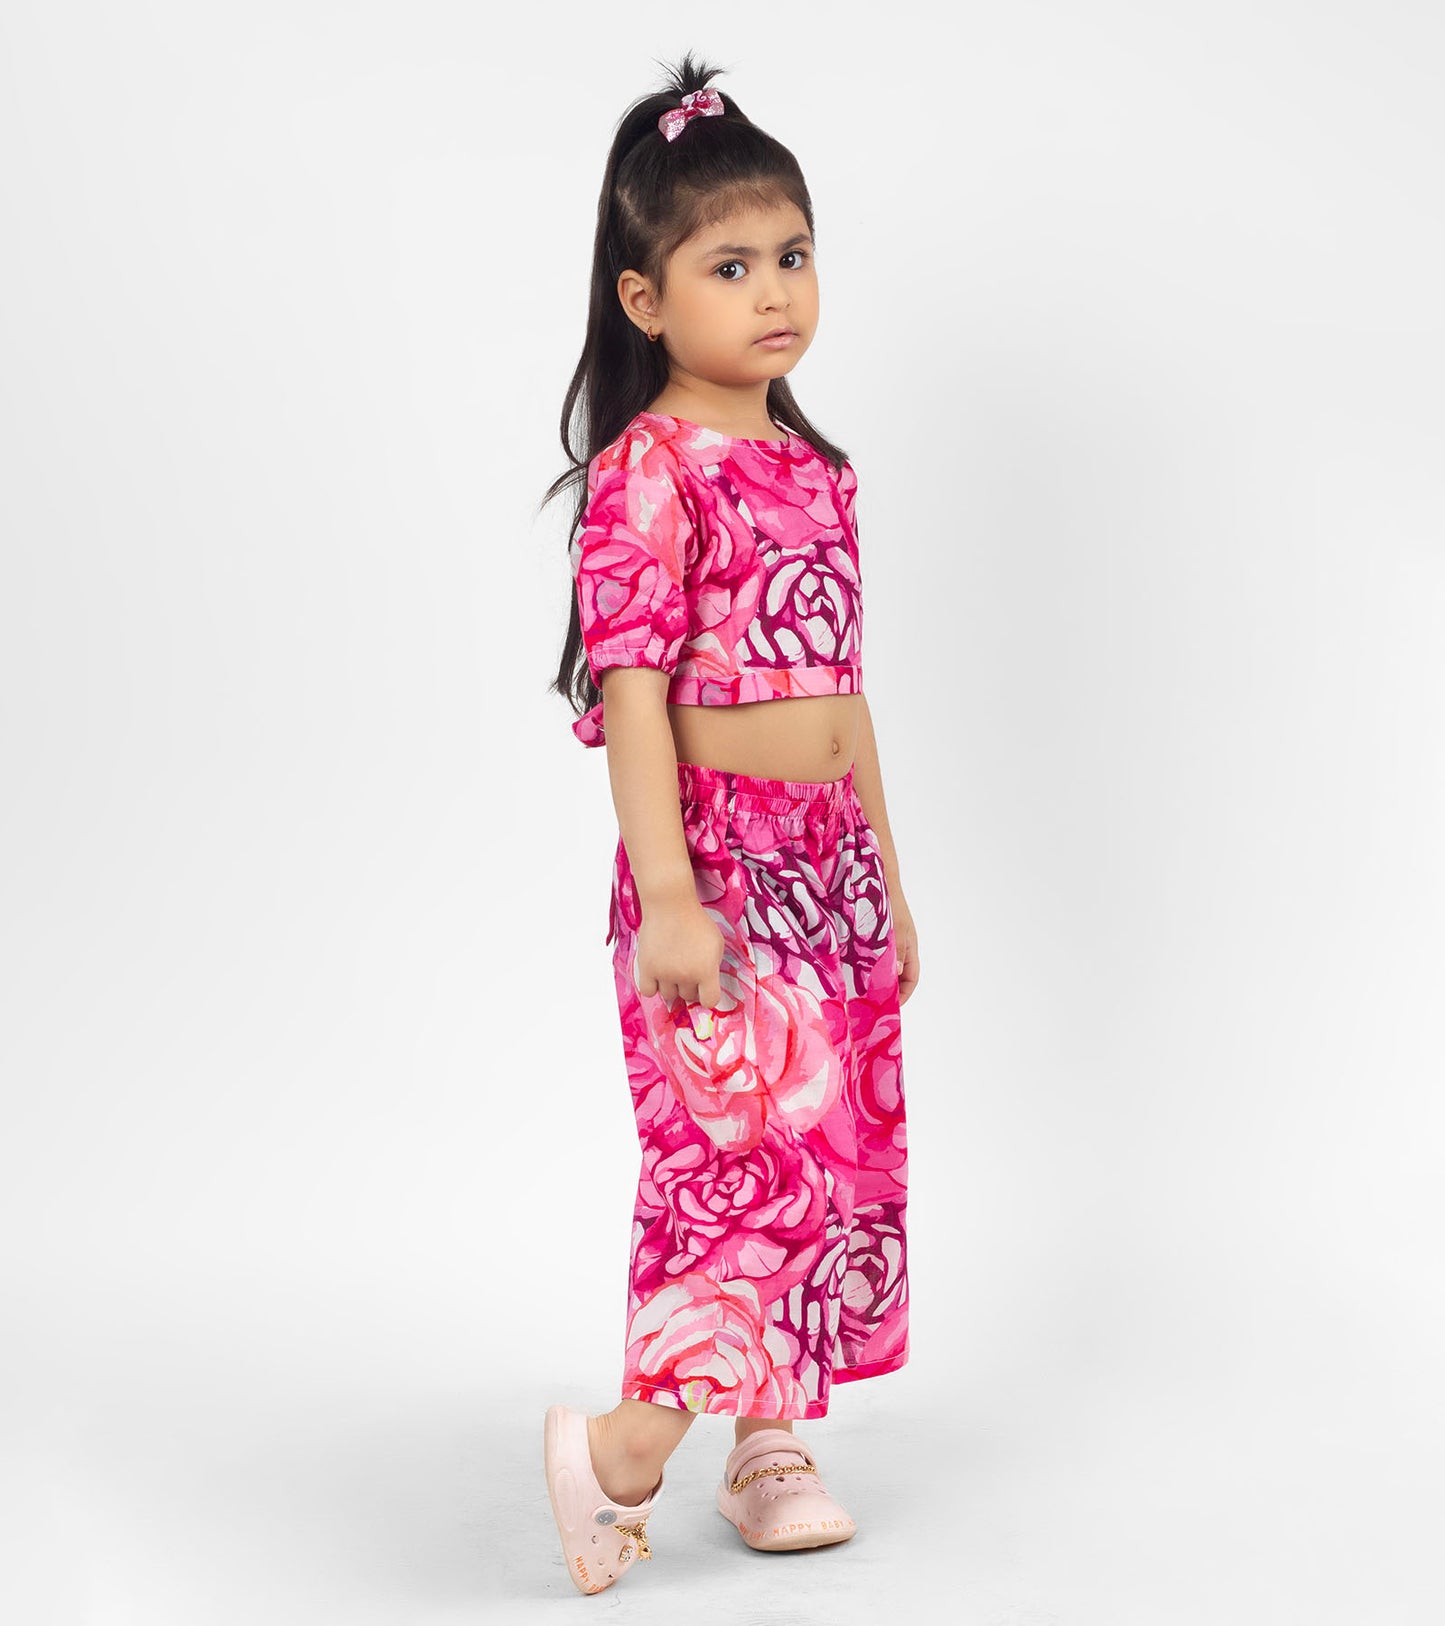 Roses Printed Co ord Sets For Girls